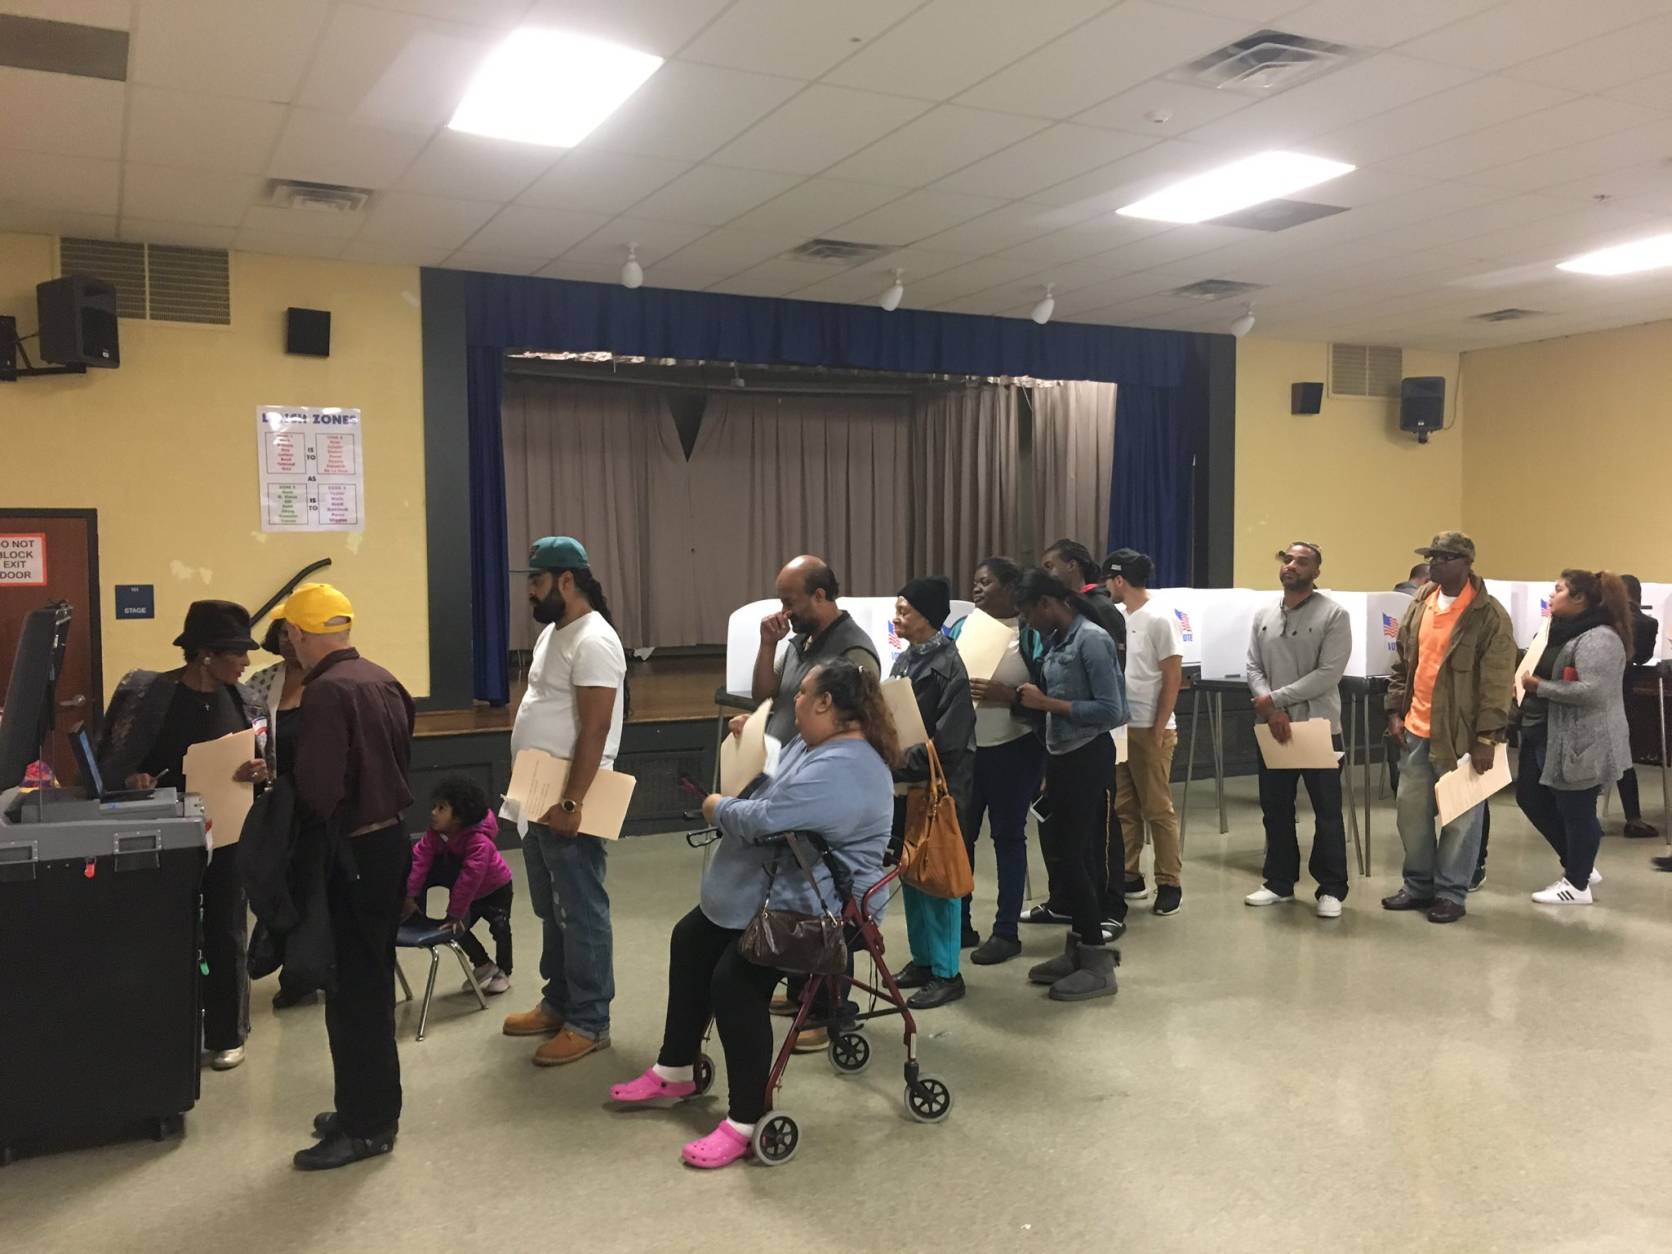 Voters wait to use the one scanner in use at Adelphi Elementary School in Prince George's County as of 1:50 p.m. Tuesday, Nov. 8. Some have waited more than 45 minutes. (WTOP/Mike Murillo)